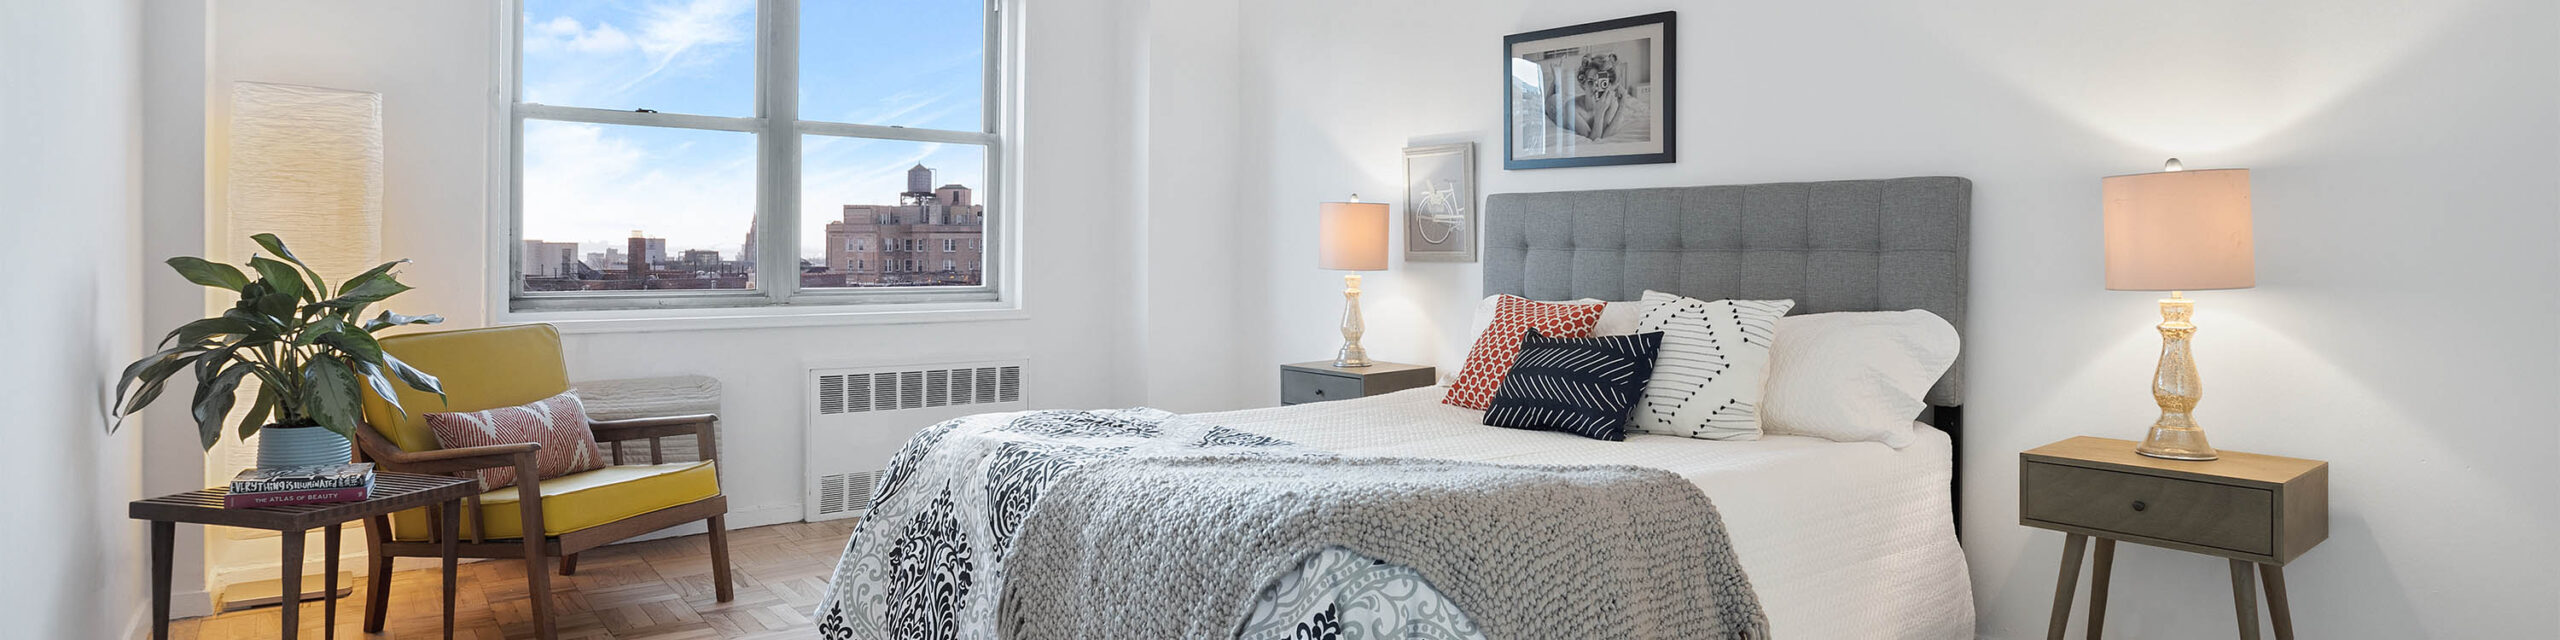 Staged bedroom with three multicolored pillows, gray headboard, two nightstands with lamps, wall art, and to the left two windows overlooking Brooklyn, a yellow chair and end table with plant